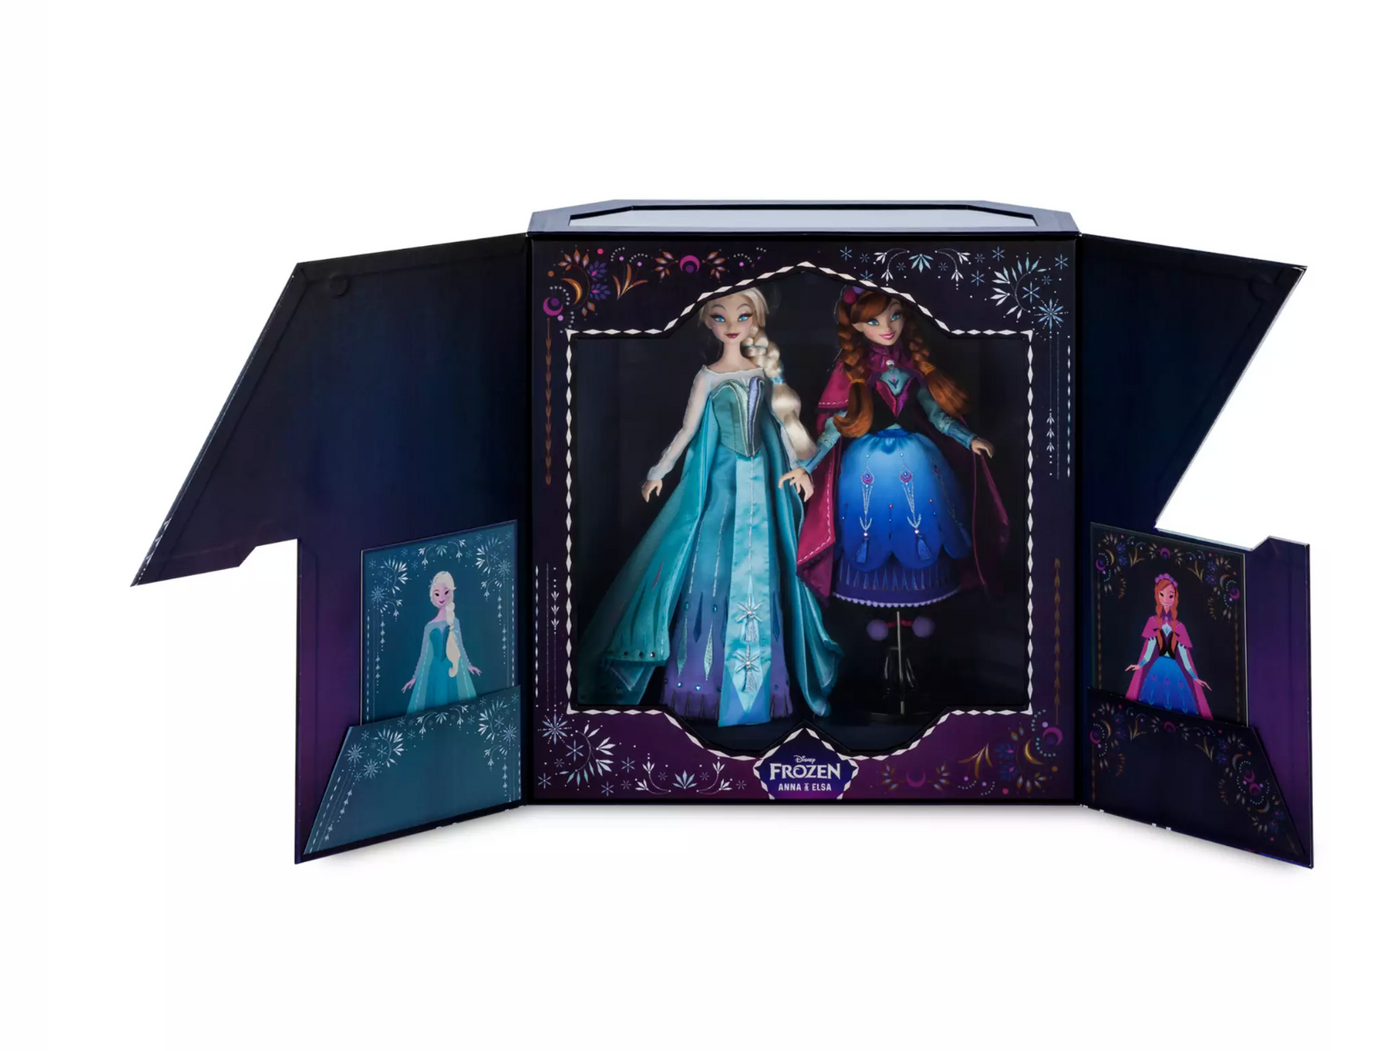 Disney Anna and Elsa Limited Edition Collector Doll Set by Brittney Lee New Box